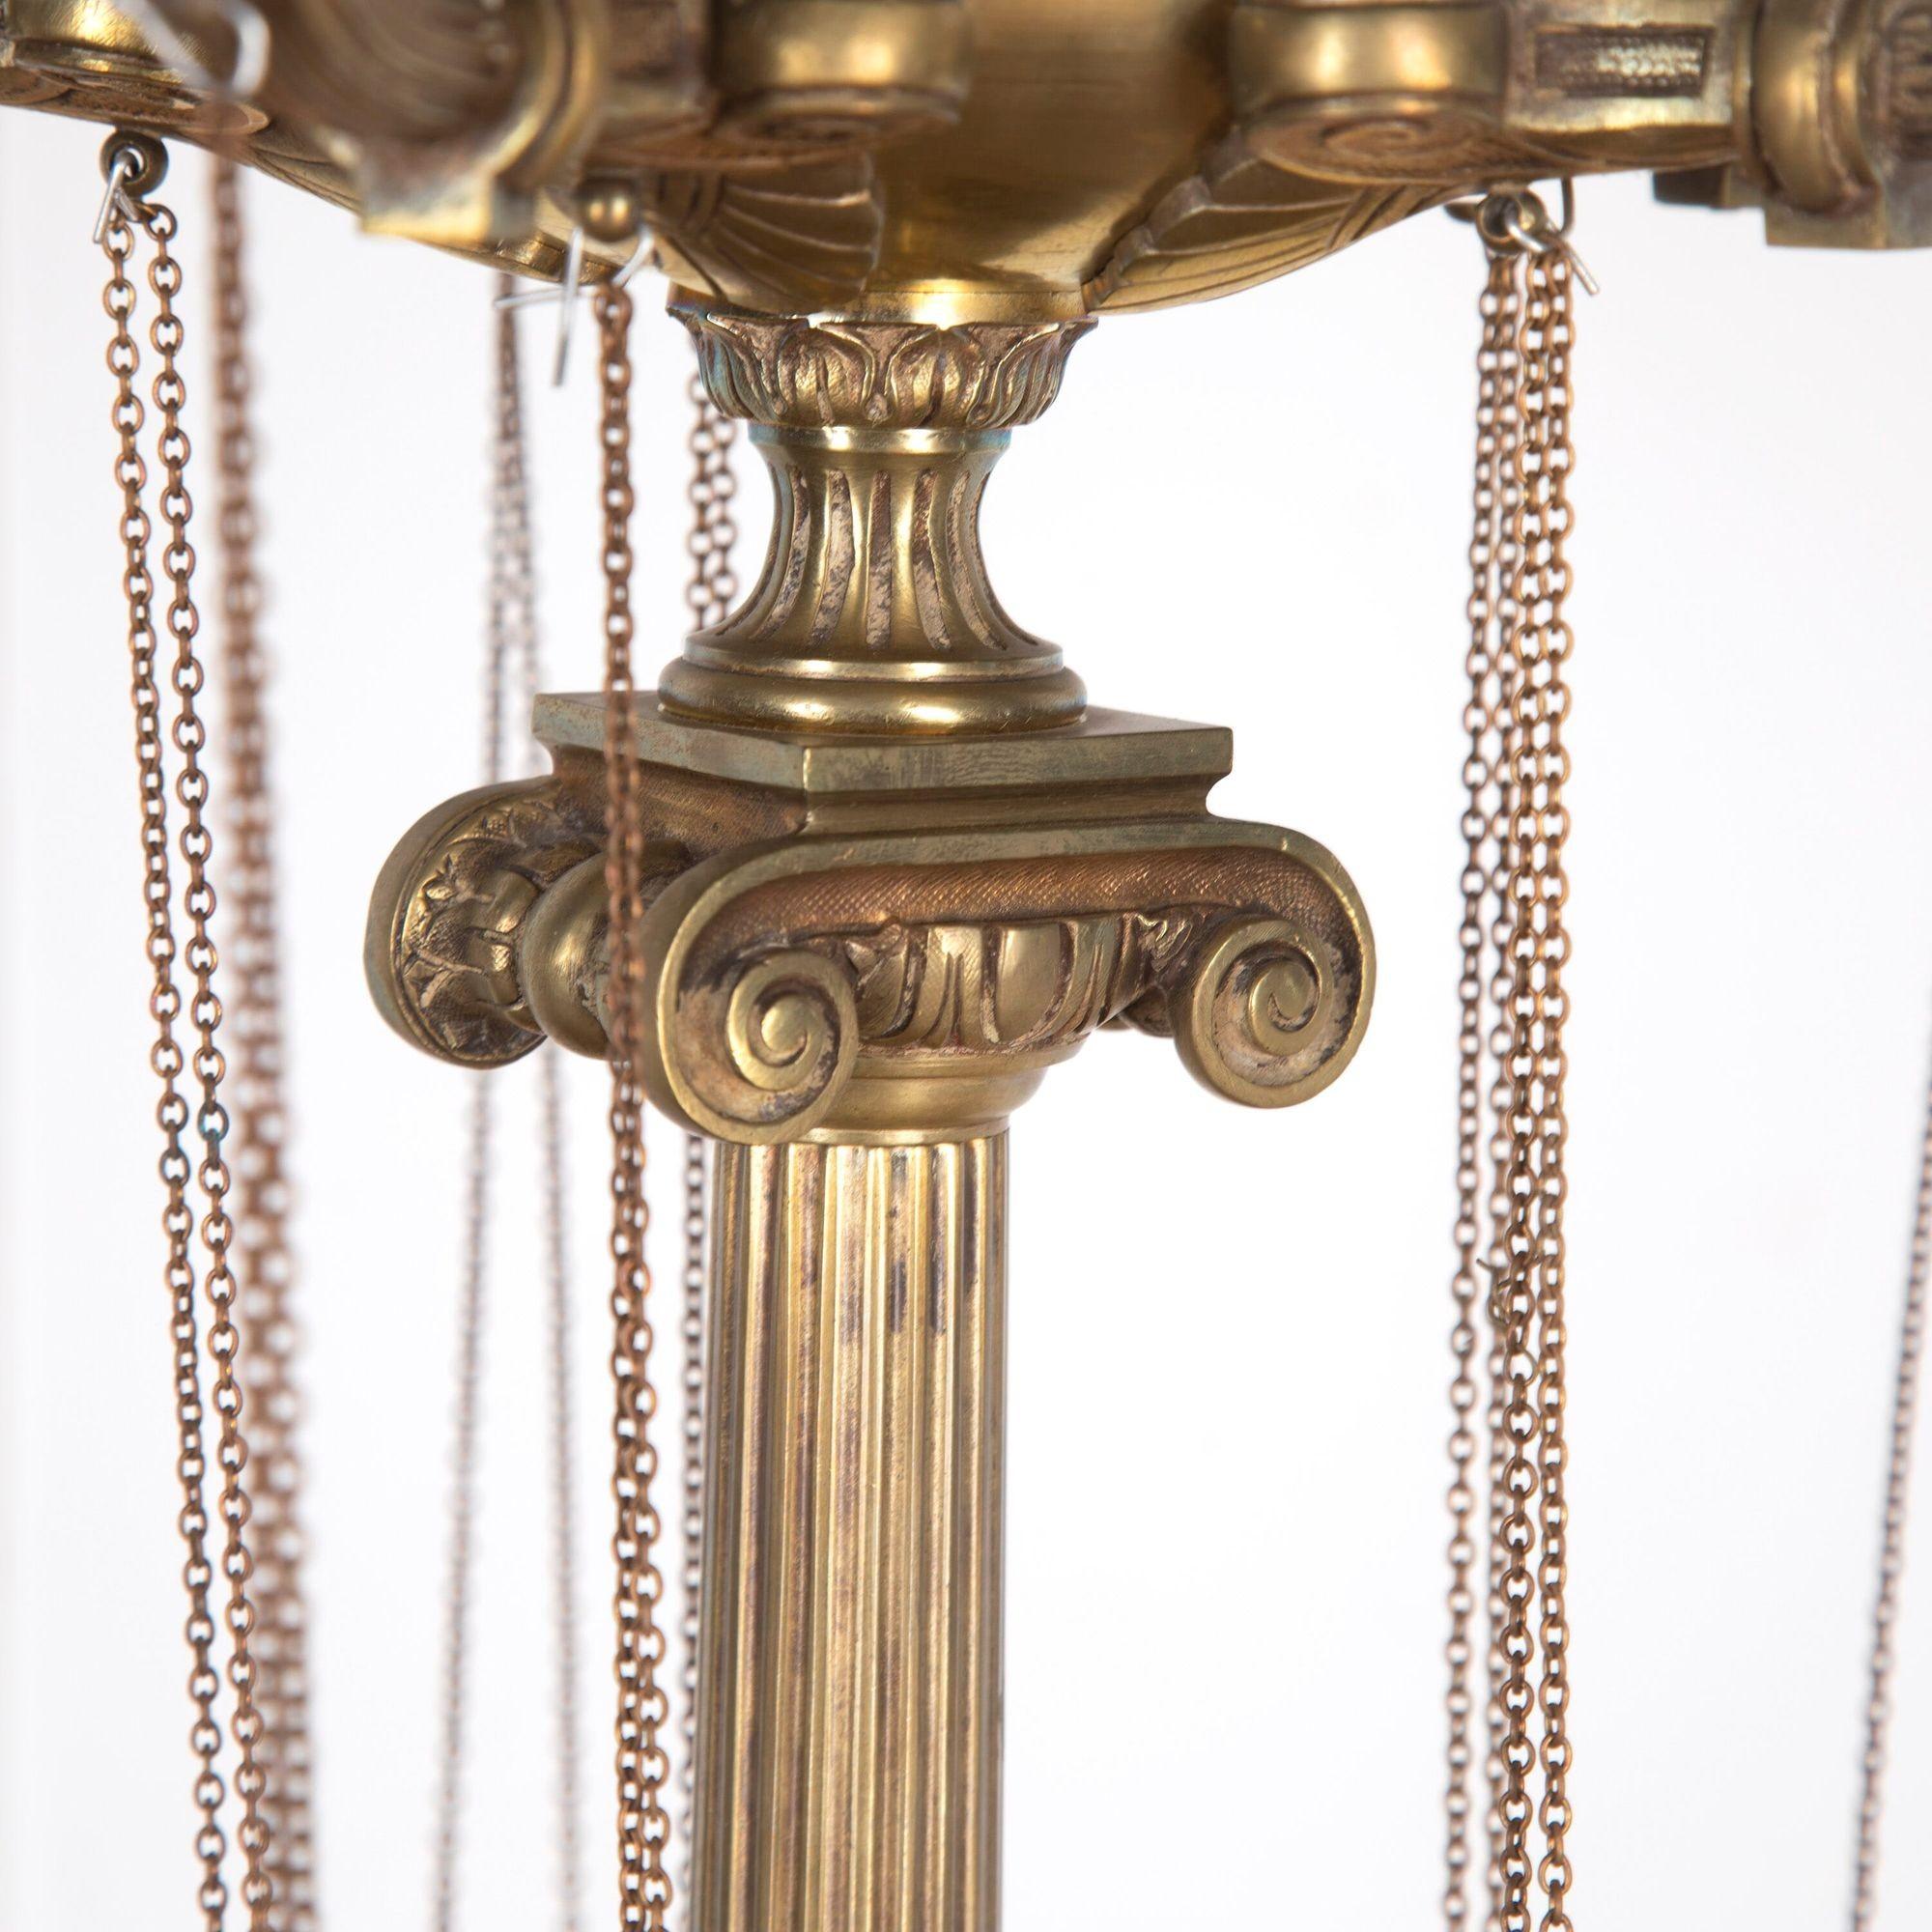 English Large Pair of Neoclassical Candelabras